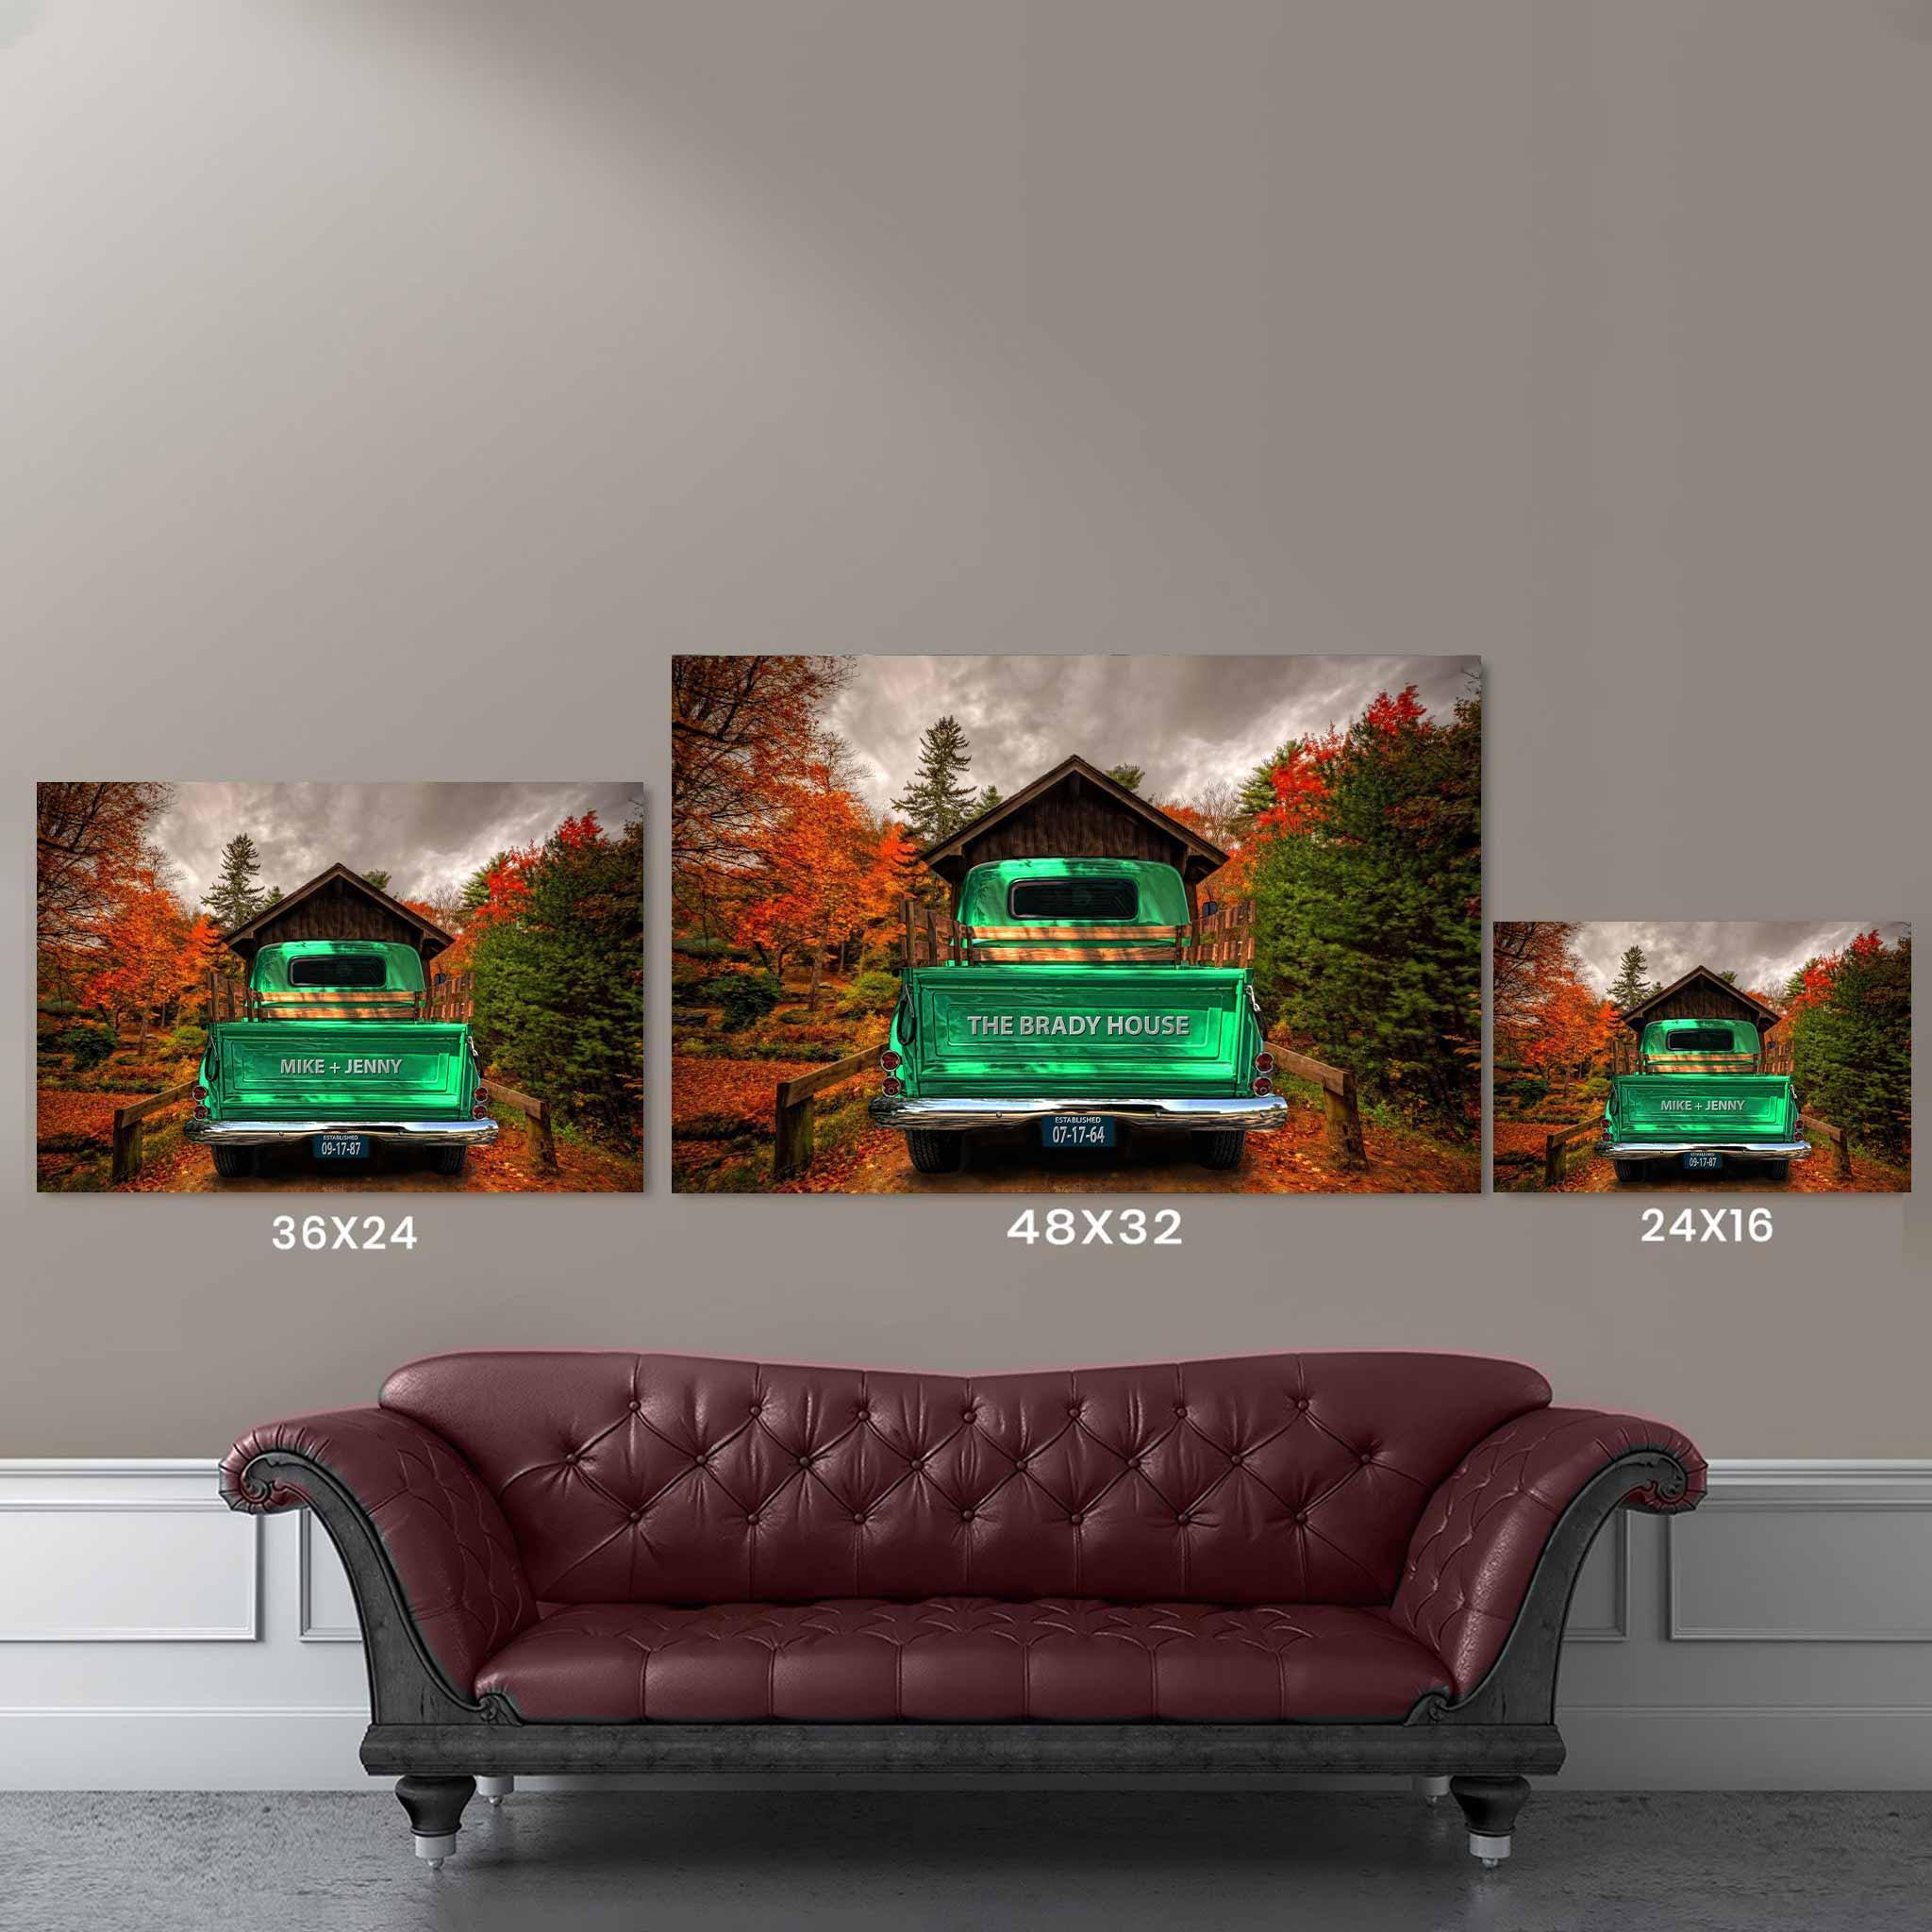 Vintage Truck (Mint Green) On Covered Bridge Personalized Tailgate & License Plate CanvasCustomly Gifts